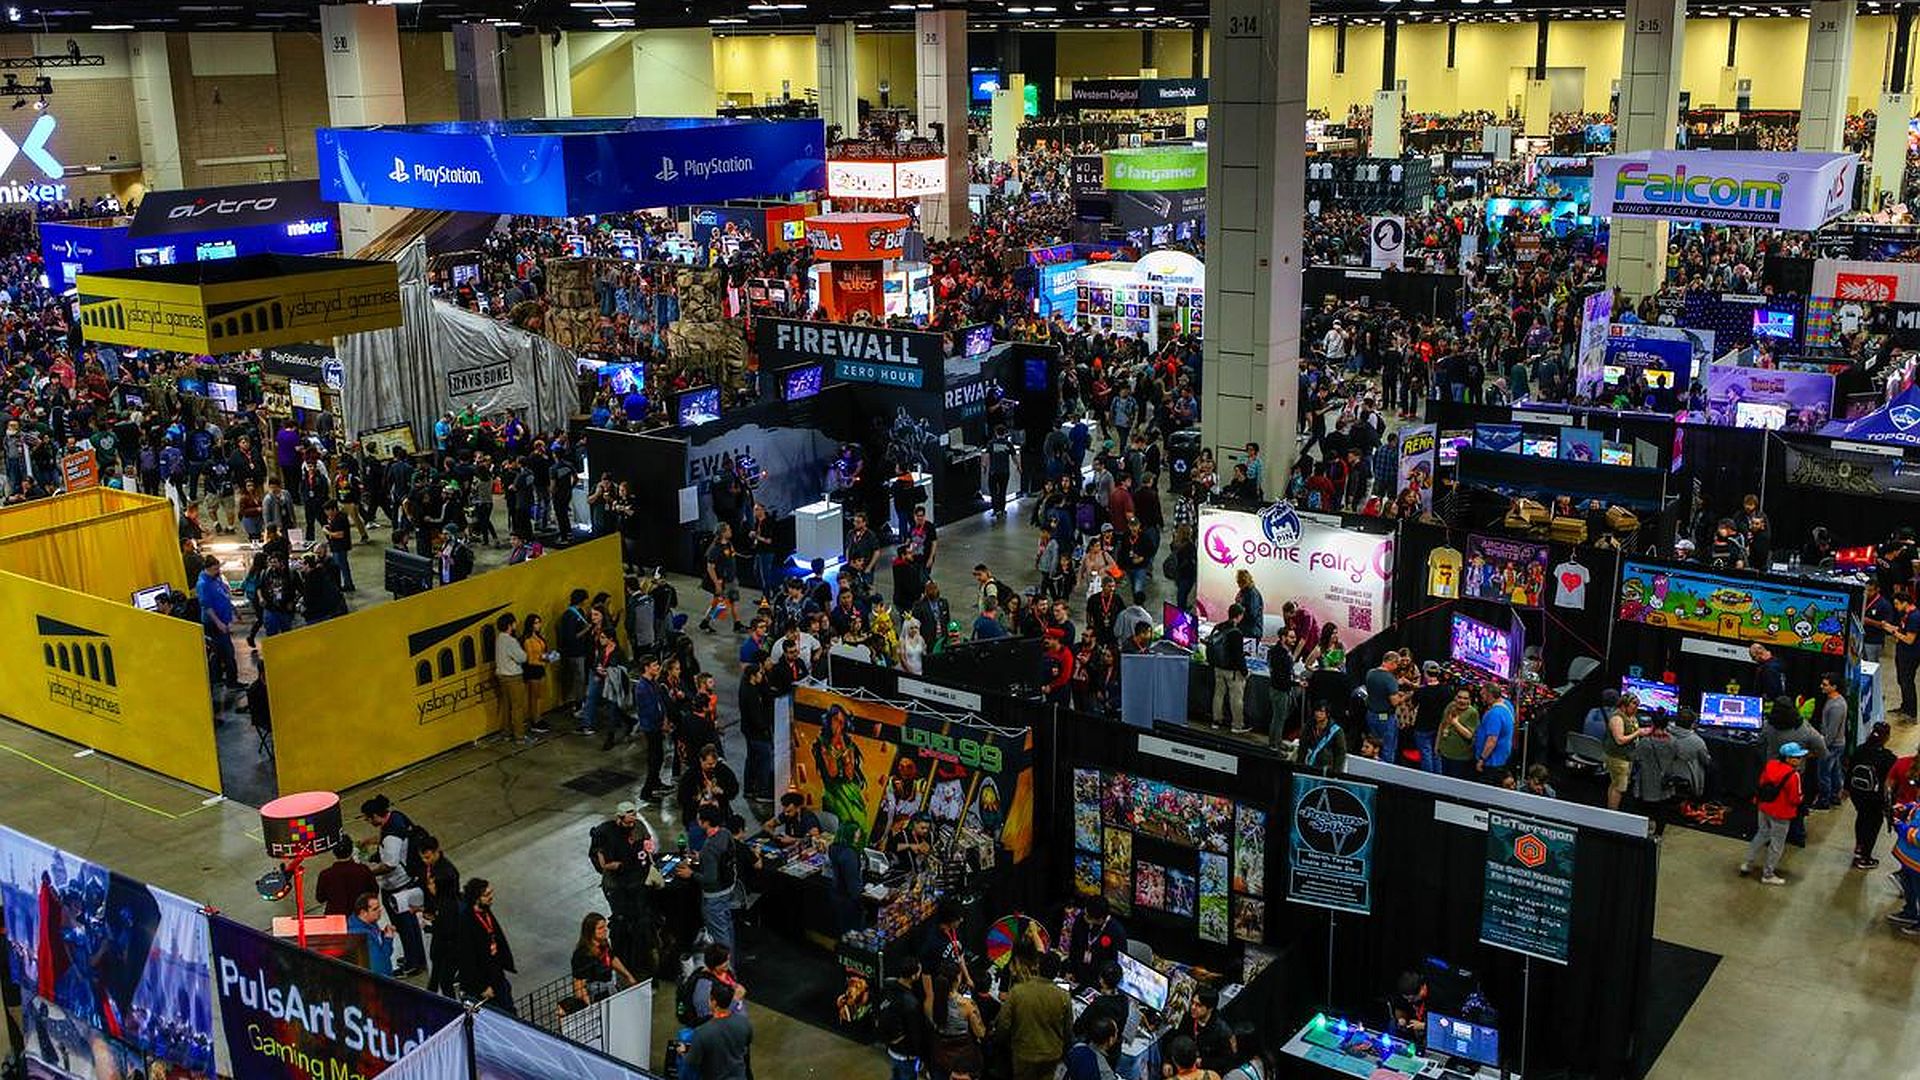 We’re giving away five tickets to all four days of PAX West!